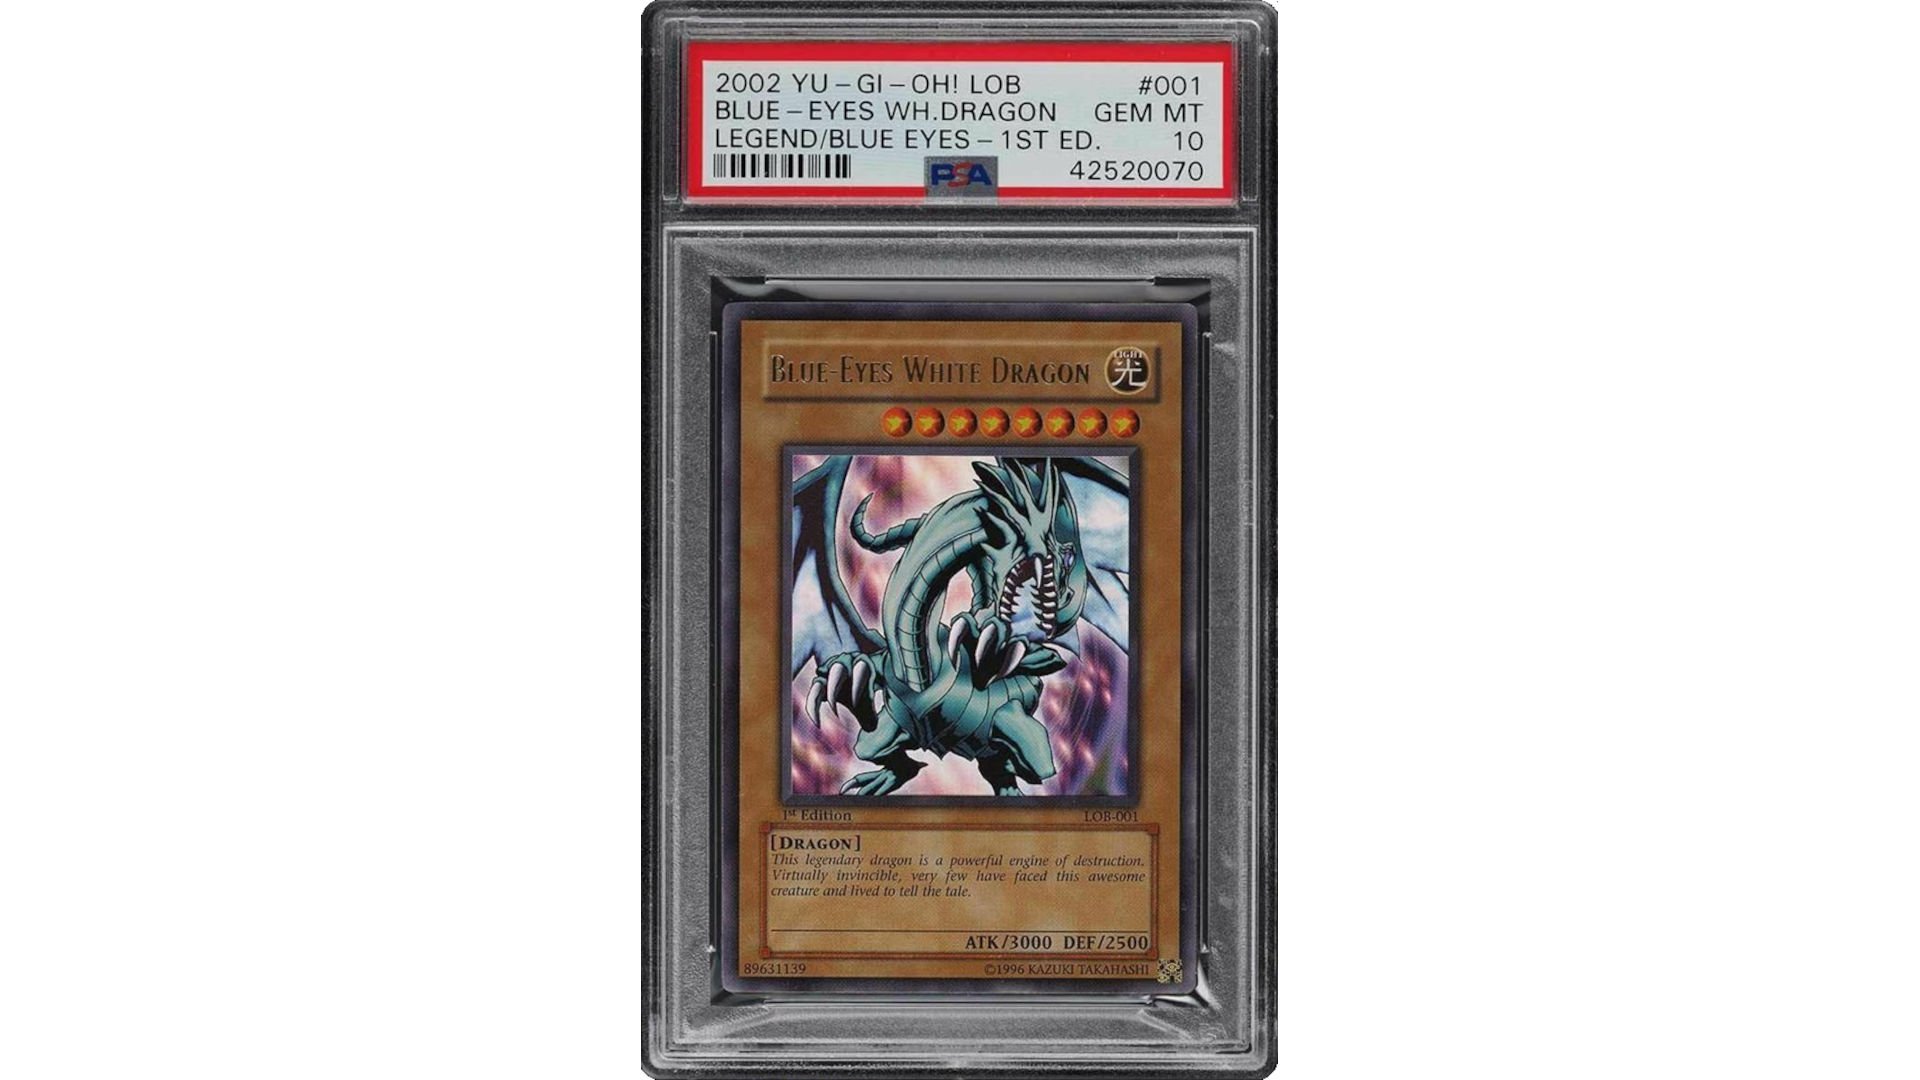 Most expensive Yugioh cards - photo of rare YuGioh card, the graded Blue-Eyes White Dragon